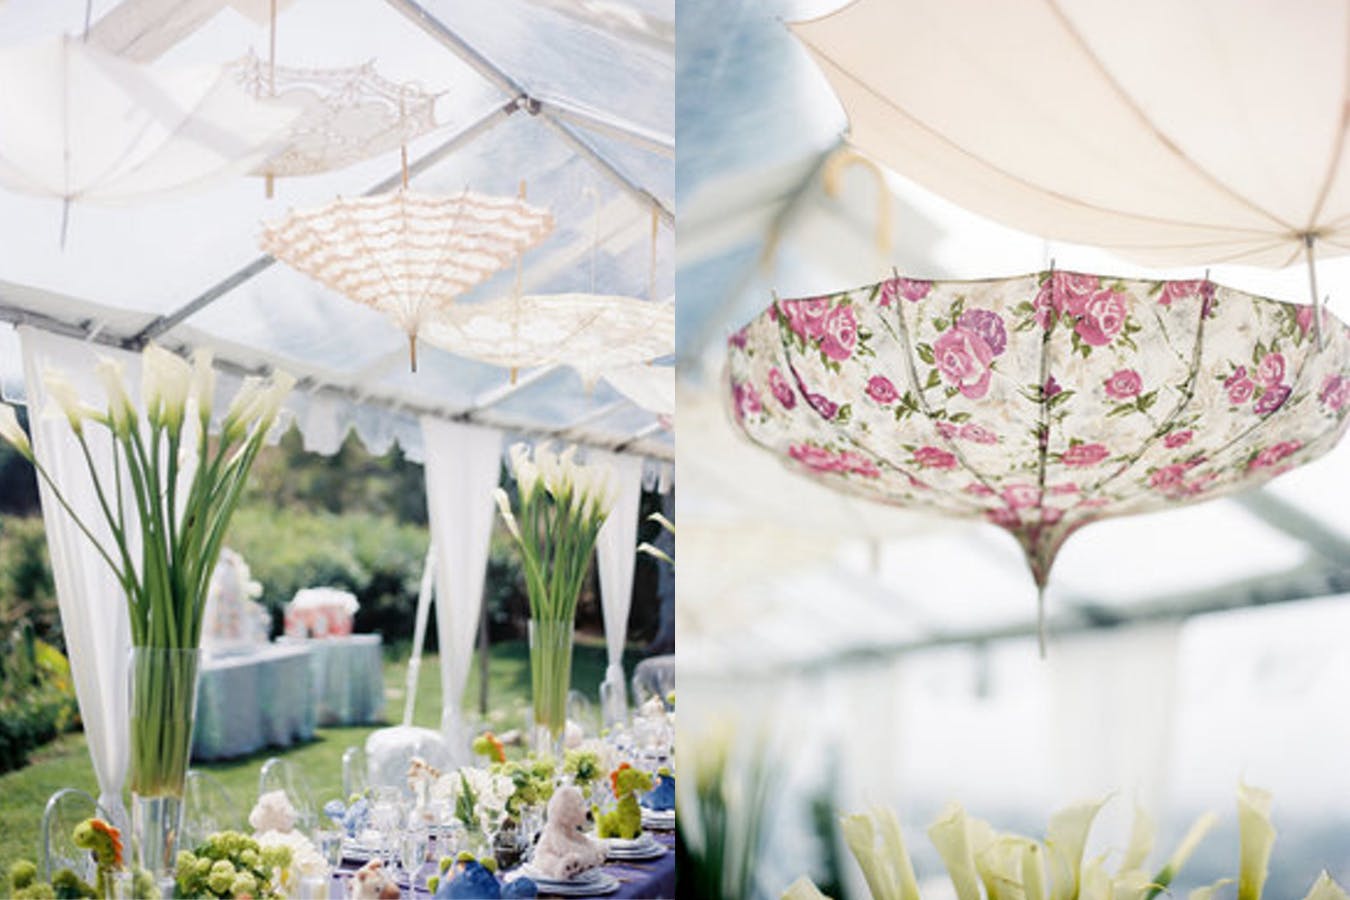 Transparent Tent Rain-Themed Baby Shower With Umbrella Ceiling Installation | PartySlate